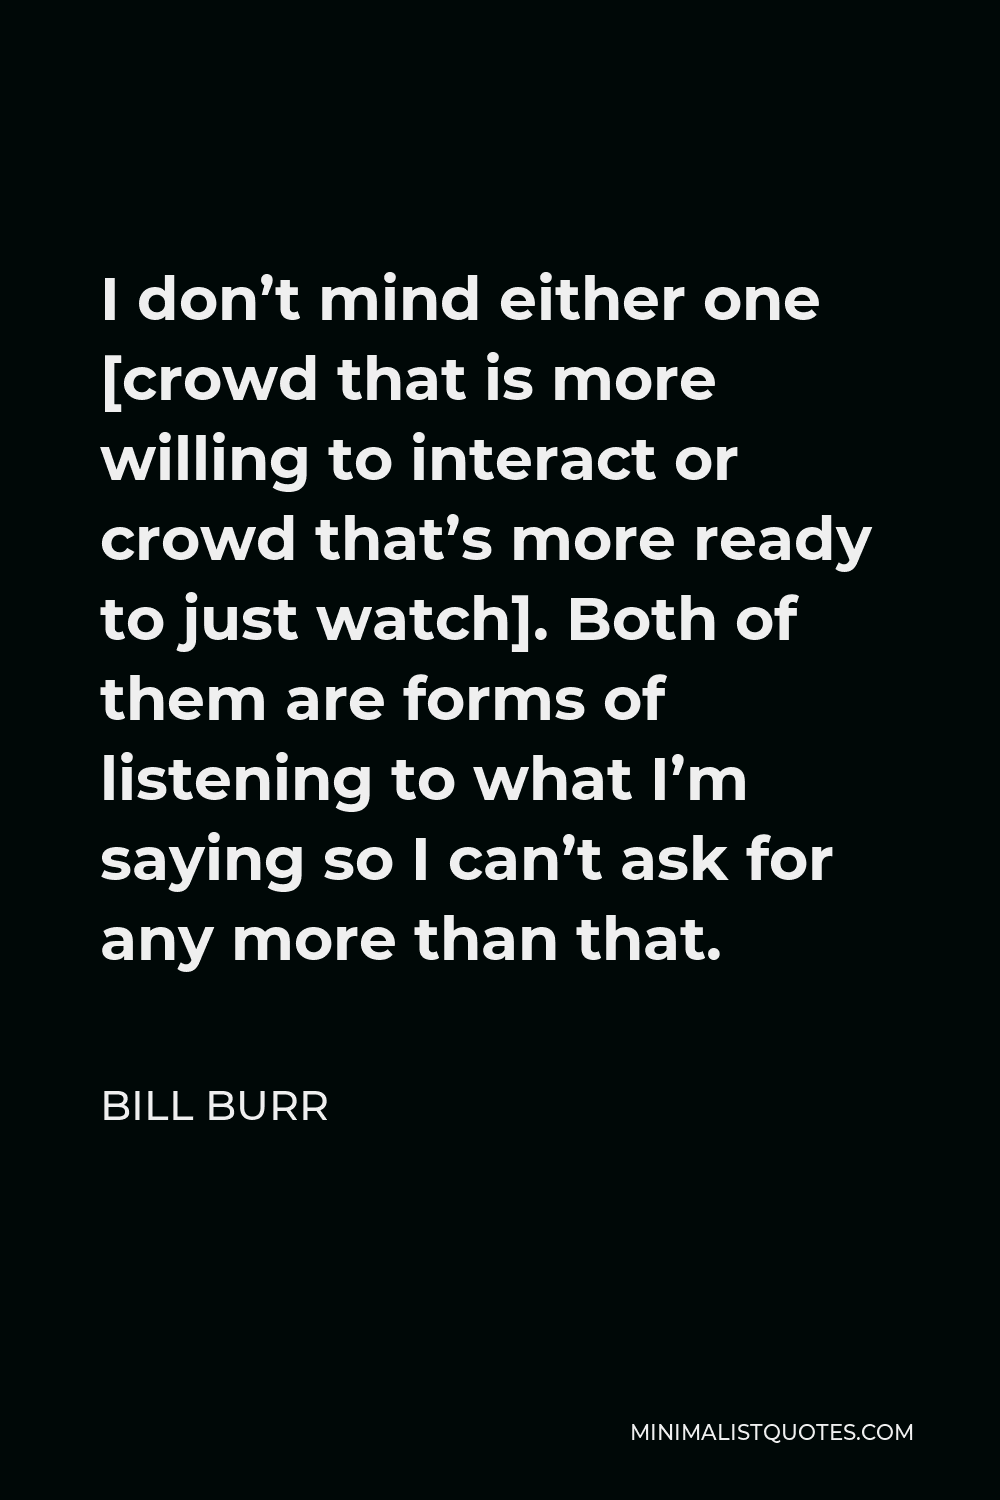 Bill Burr Quote - I don’t mind either one [crowd that is more willing to interact or crowd that’s more ready to just watch]. Both of them are forms of listening to what I’m saying so I can’t ask for any more than that.